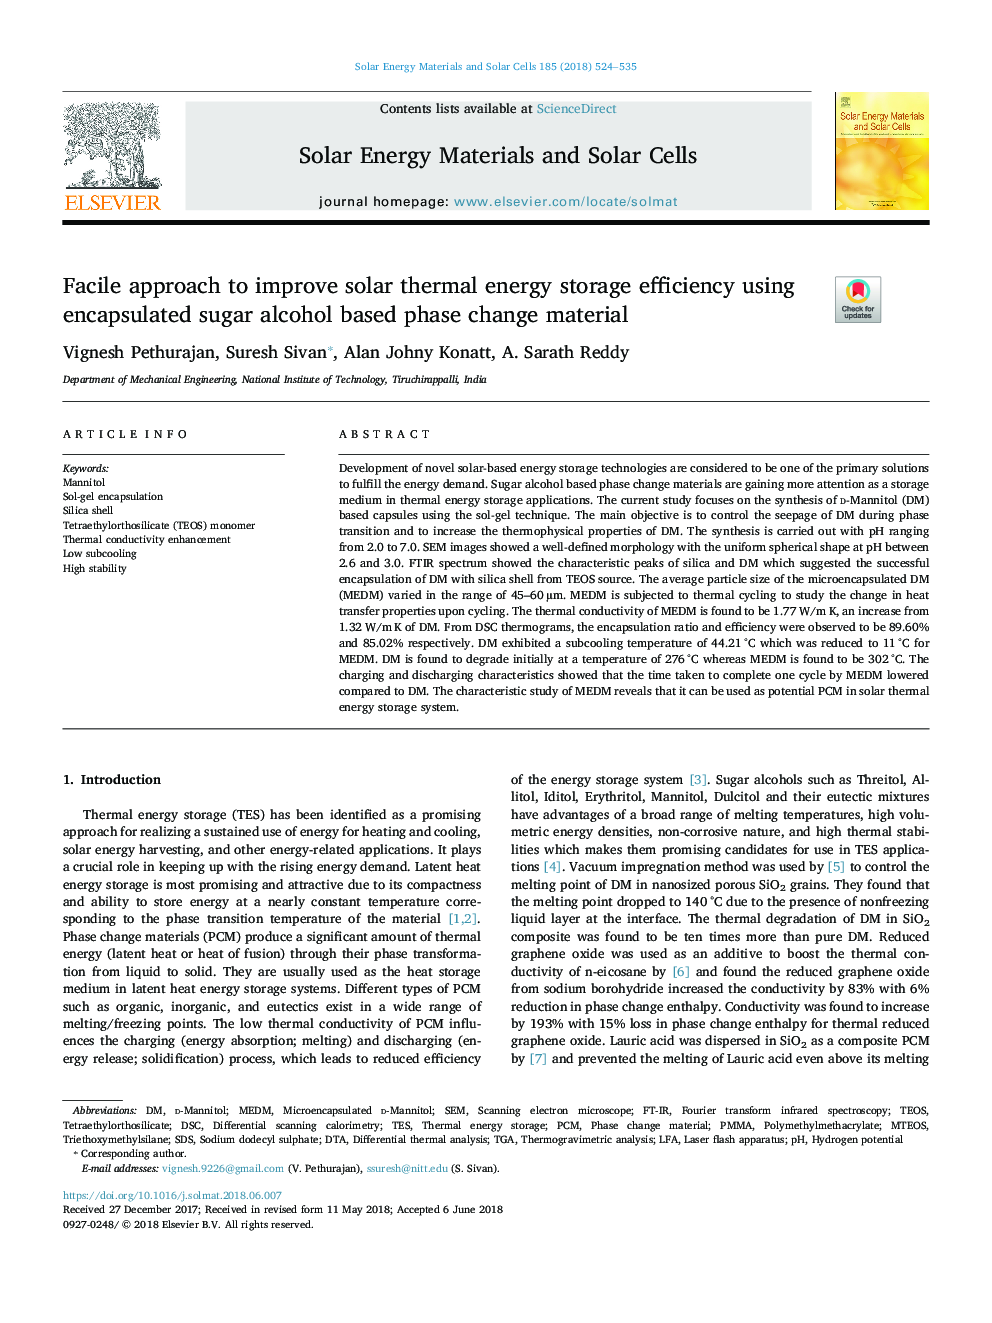 Facile approach to improve solar thermal energy storage efficiency using encapsulated sugar alcohol based phase change material